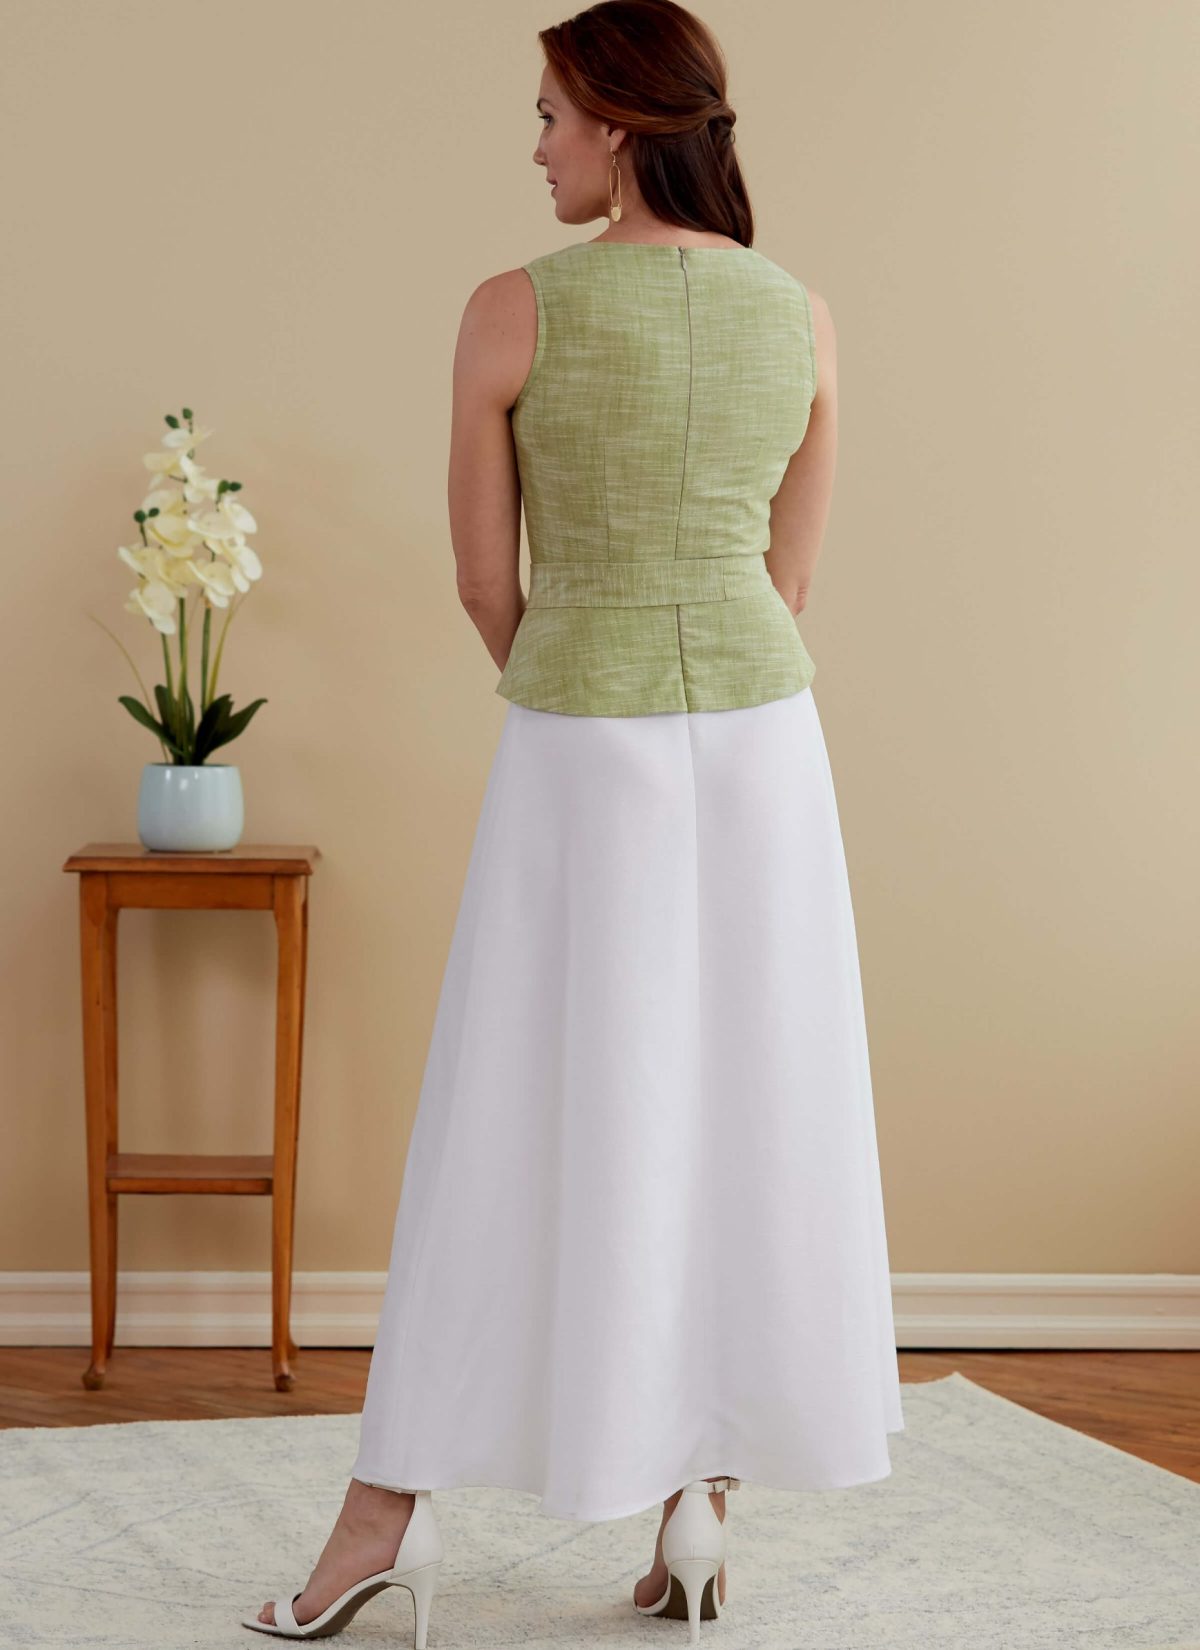 Butterick Sewing Pattern B6759 Misses' Dress, Sash and Belt